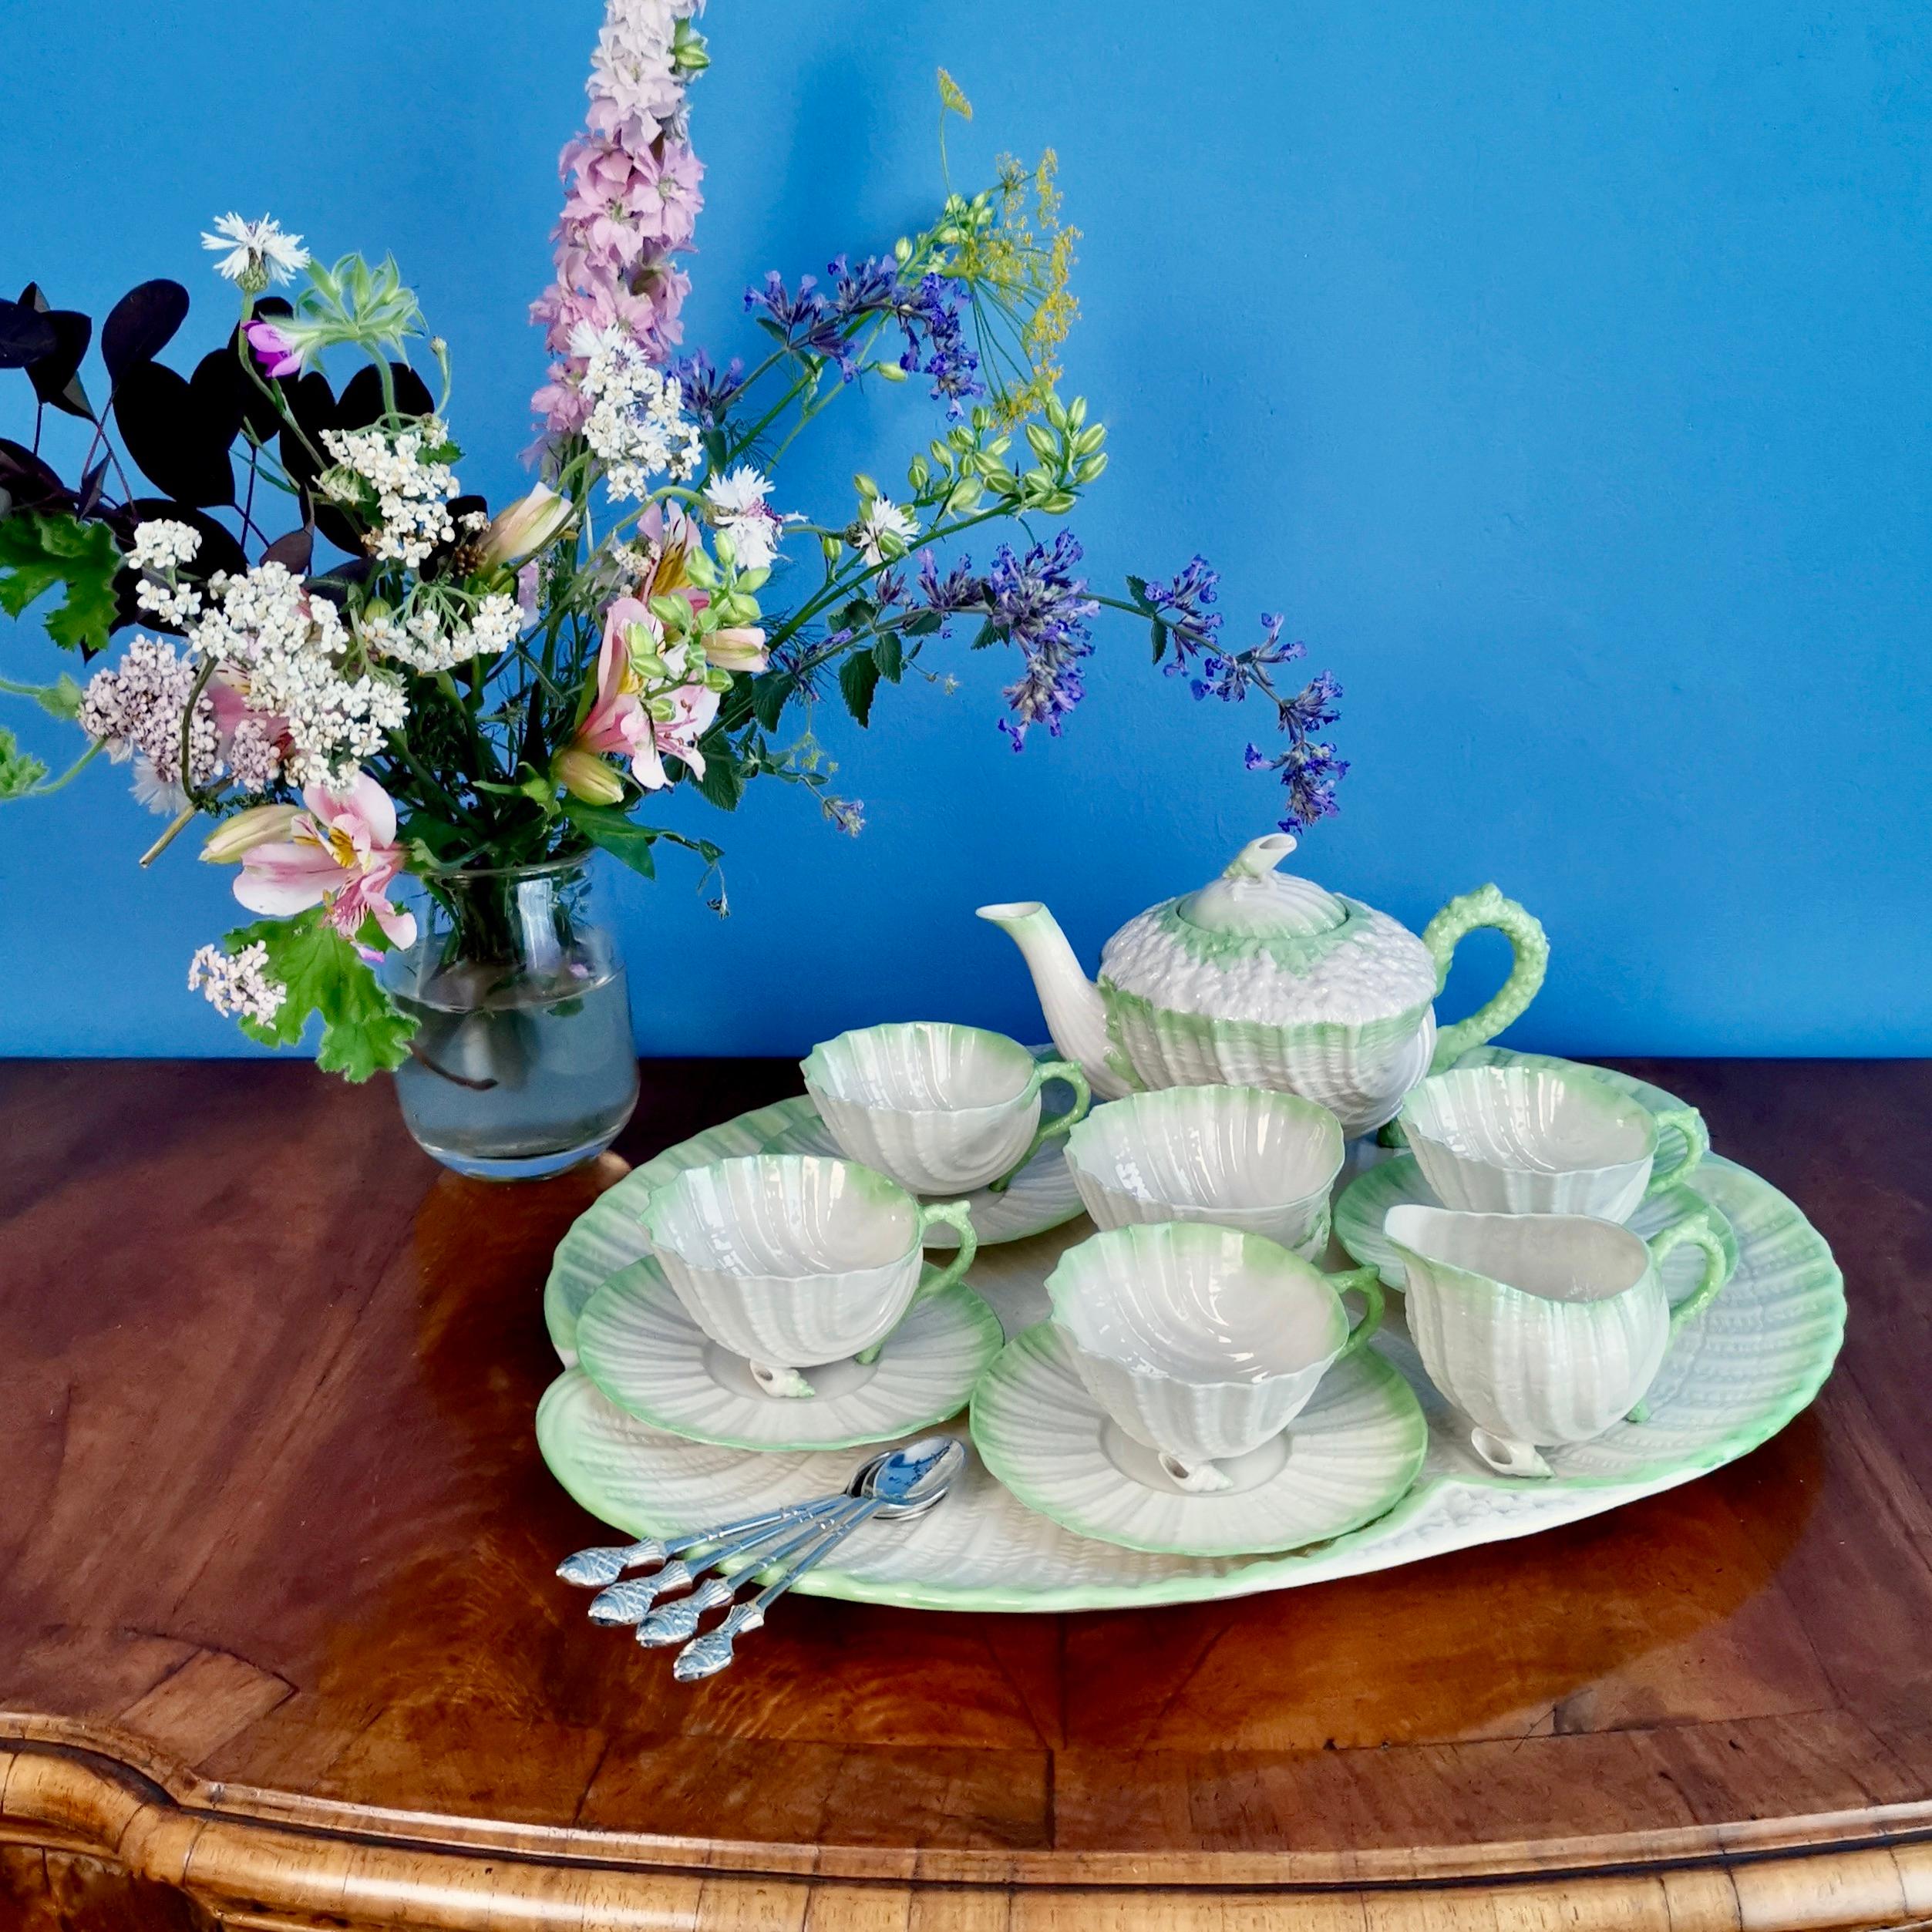 This is a rare and gorgeous Belleek cabaret tea service for four in the green Neptune design made by Belleek some time between 1891 and 1926, most probably in the 1890s. The service consists of a teapot, four teacups and saucers, a milk jug and a